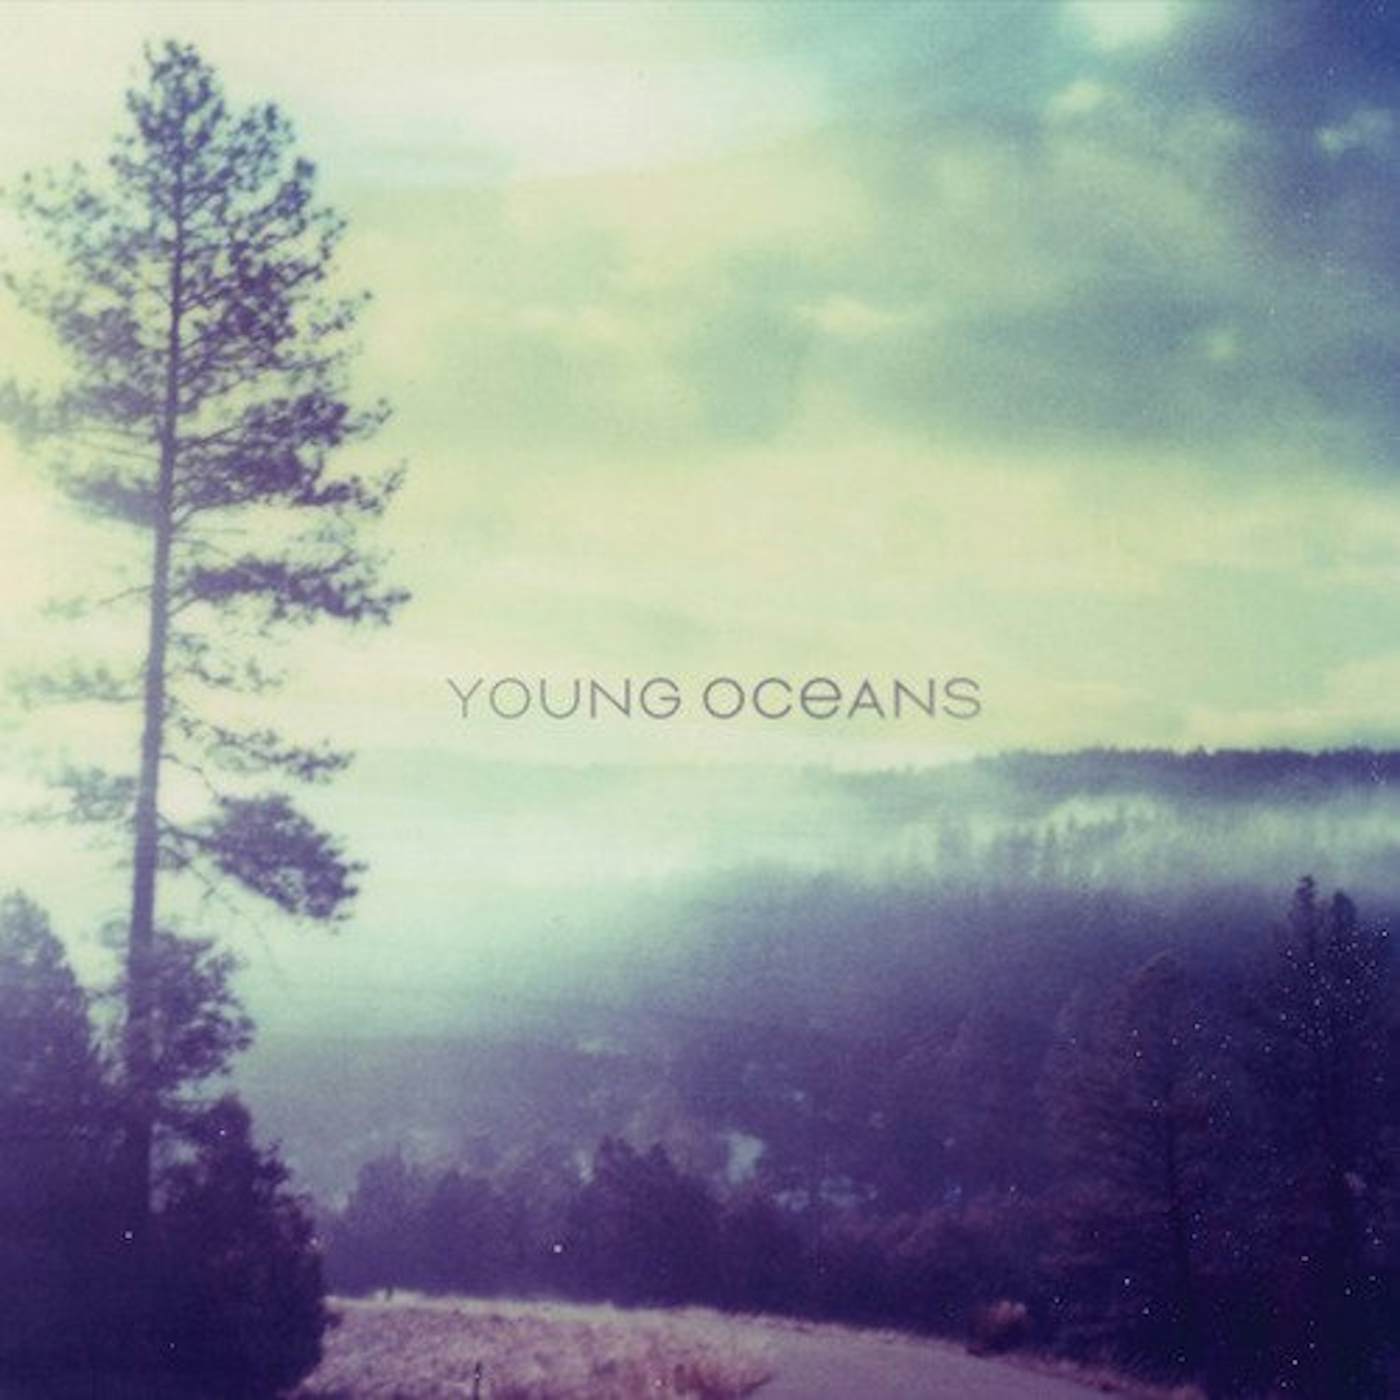 YOUNG OCEANS CD